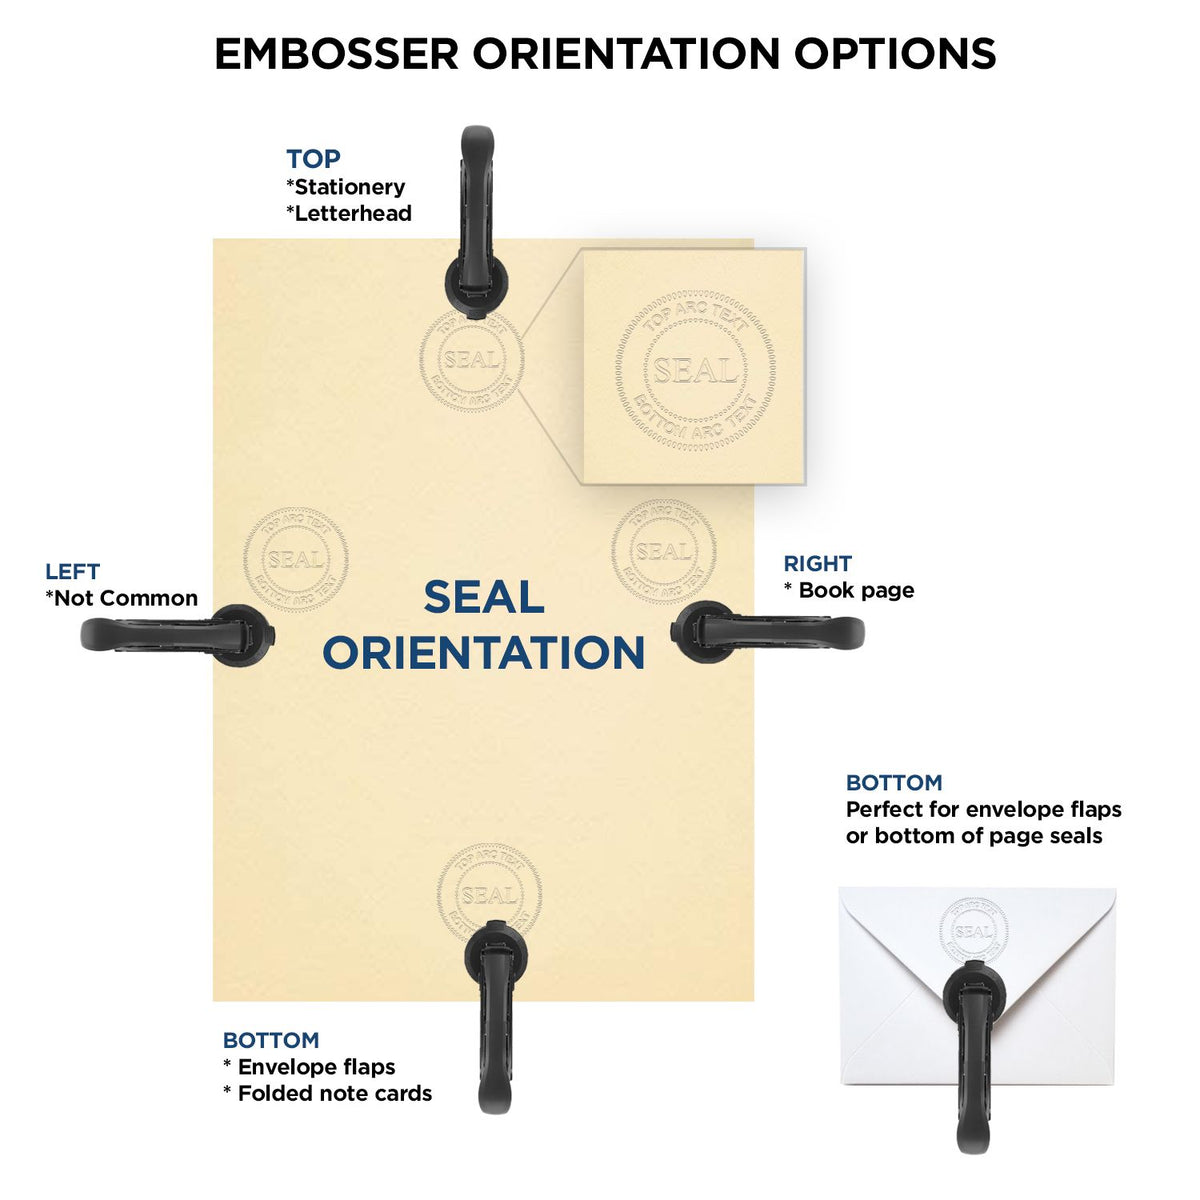 An infographic for the Gift Mississippi Land Surveyor Seal showing embosser orientation, this is showing examples of a top, bottom, right and left insert.